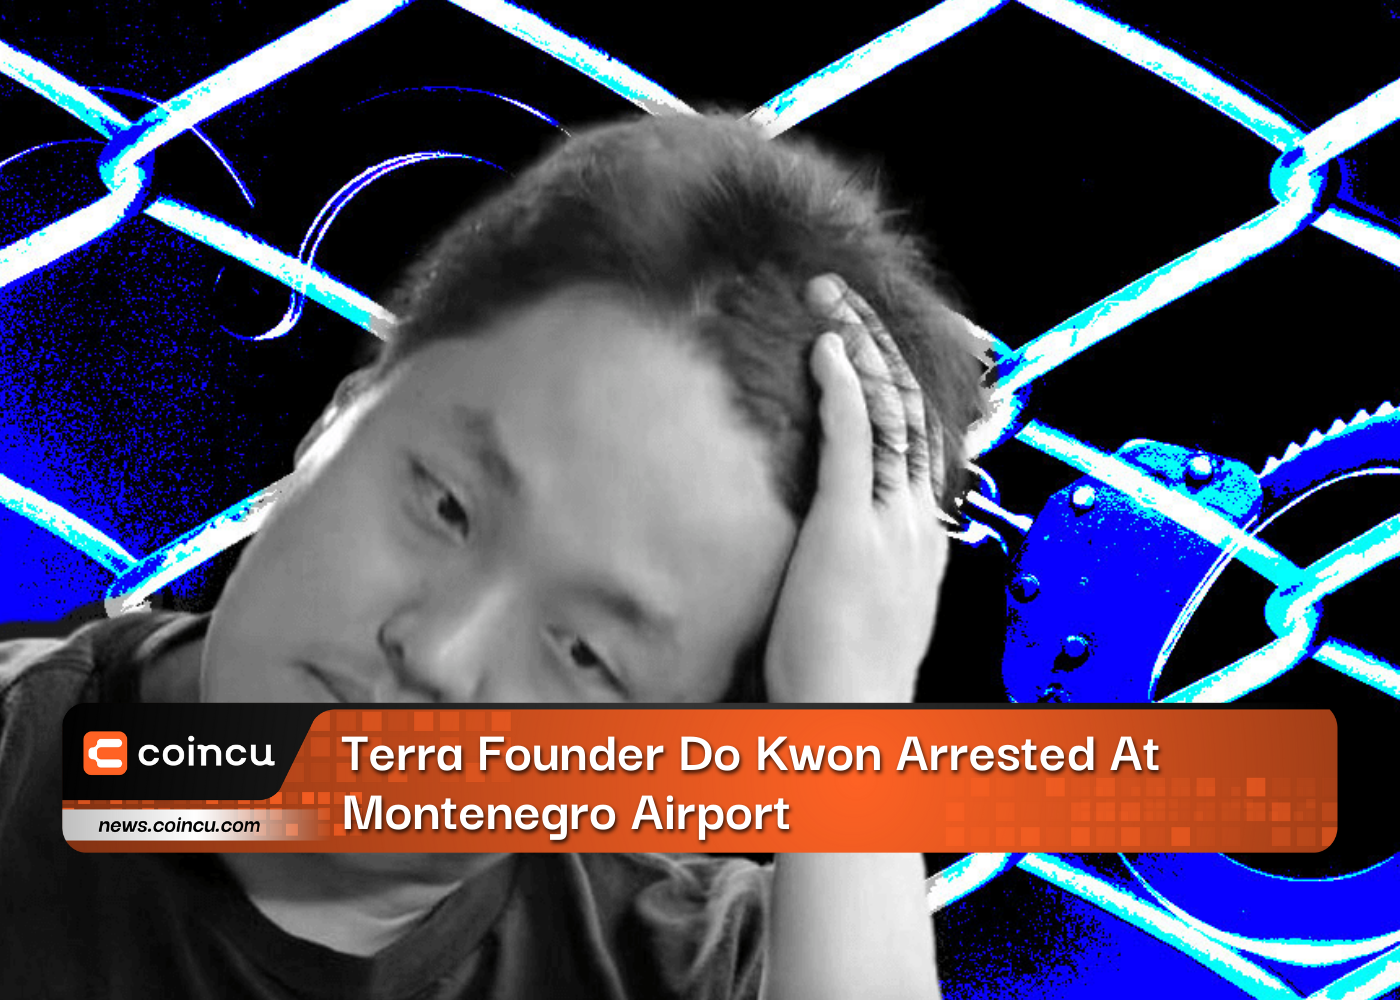 Terra Founder Do Kwon Arrested At Montenegro Airport